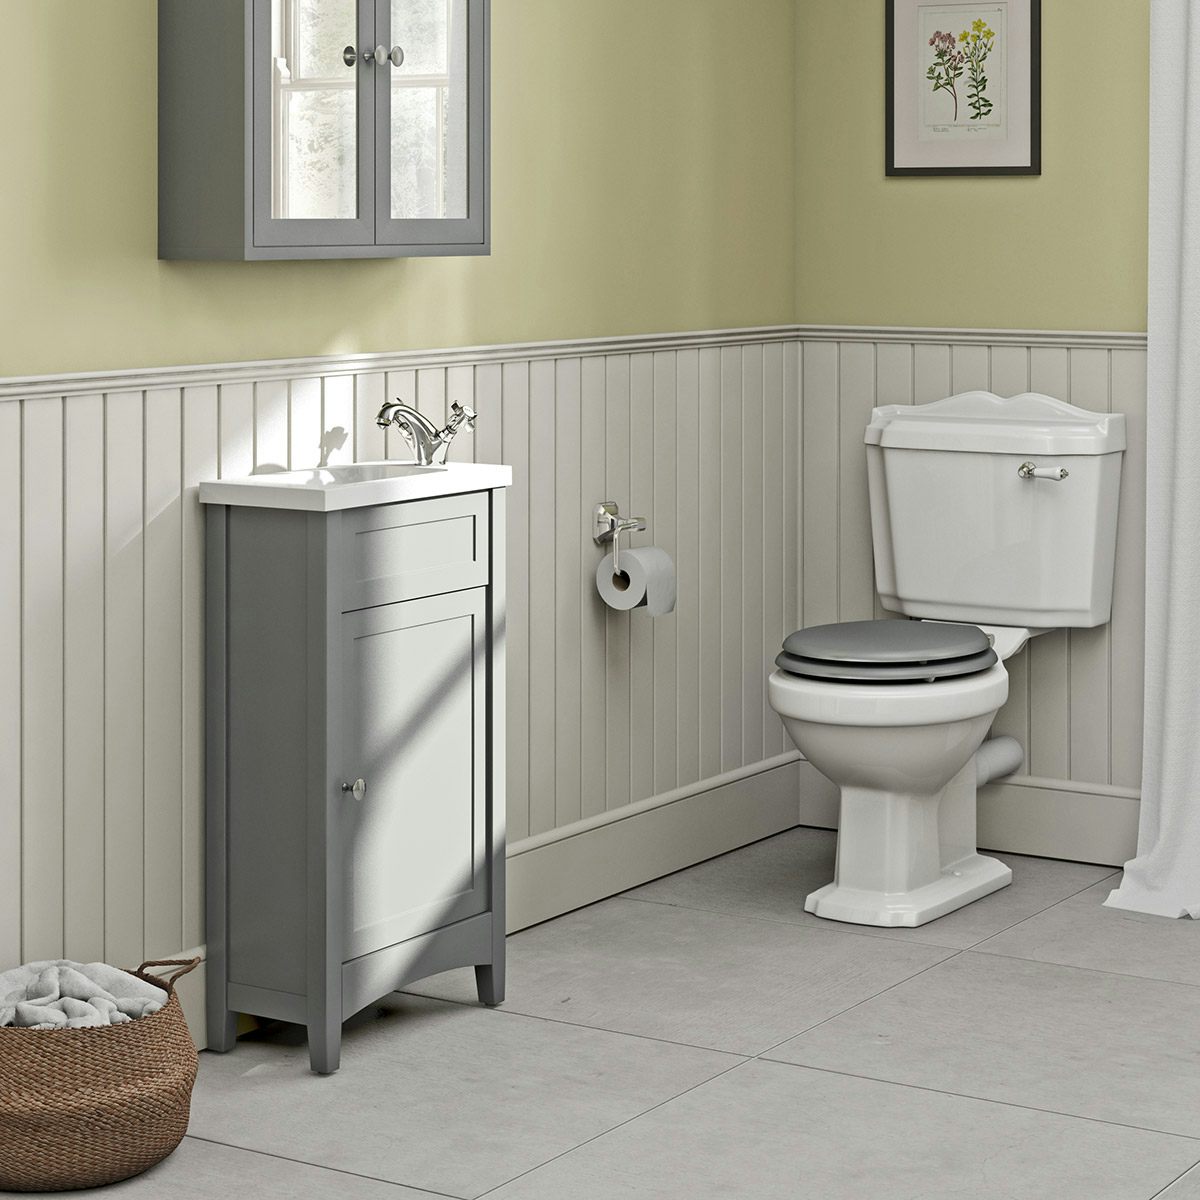 The Bath Co. Camberley satin grey complete cloakroom suite with traditional close coupled toilet